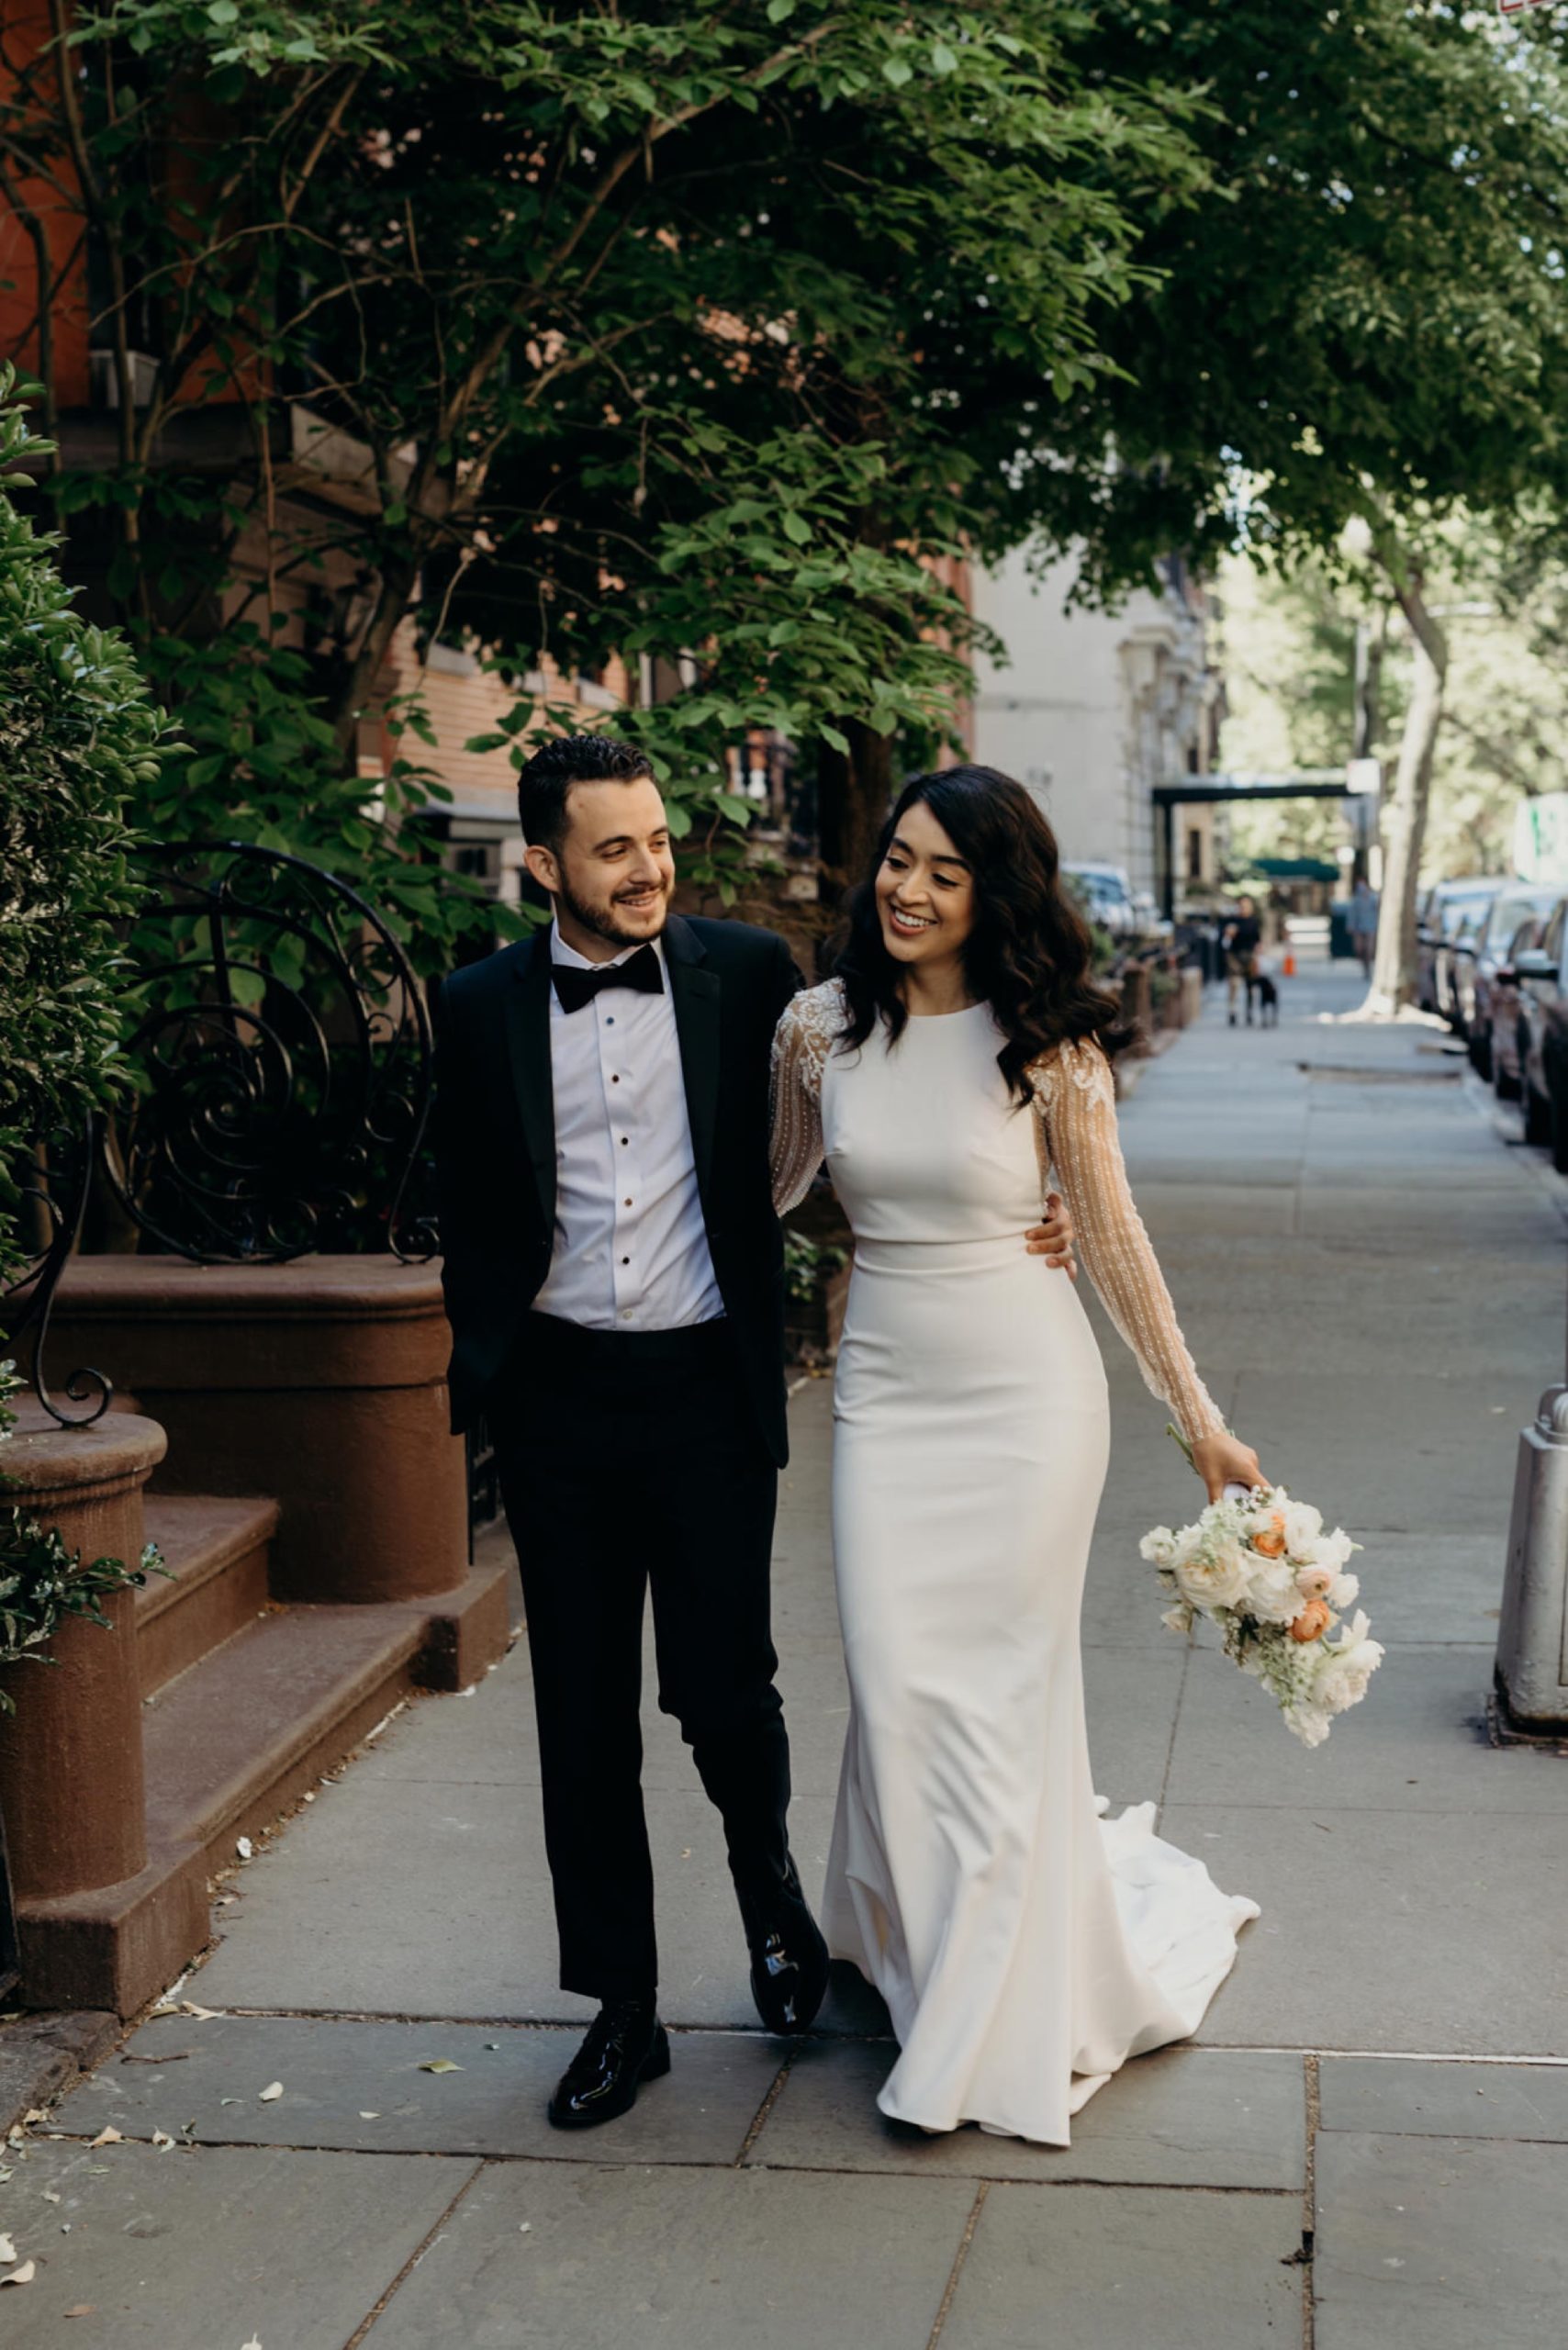 portrait of a bride and groom walking and laughing on their wedding day in brooklyn, new york city